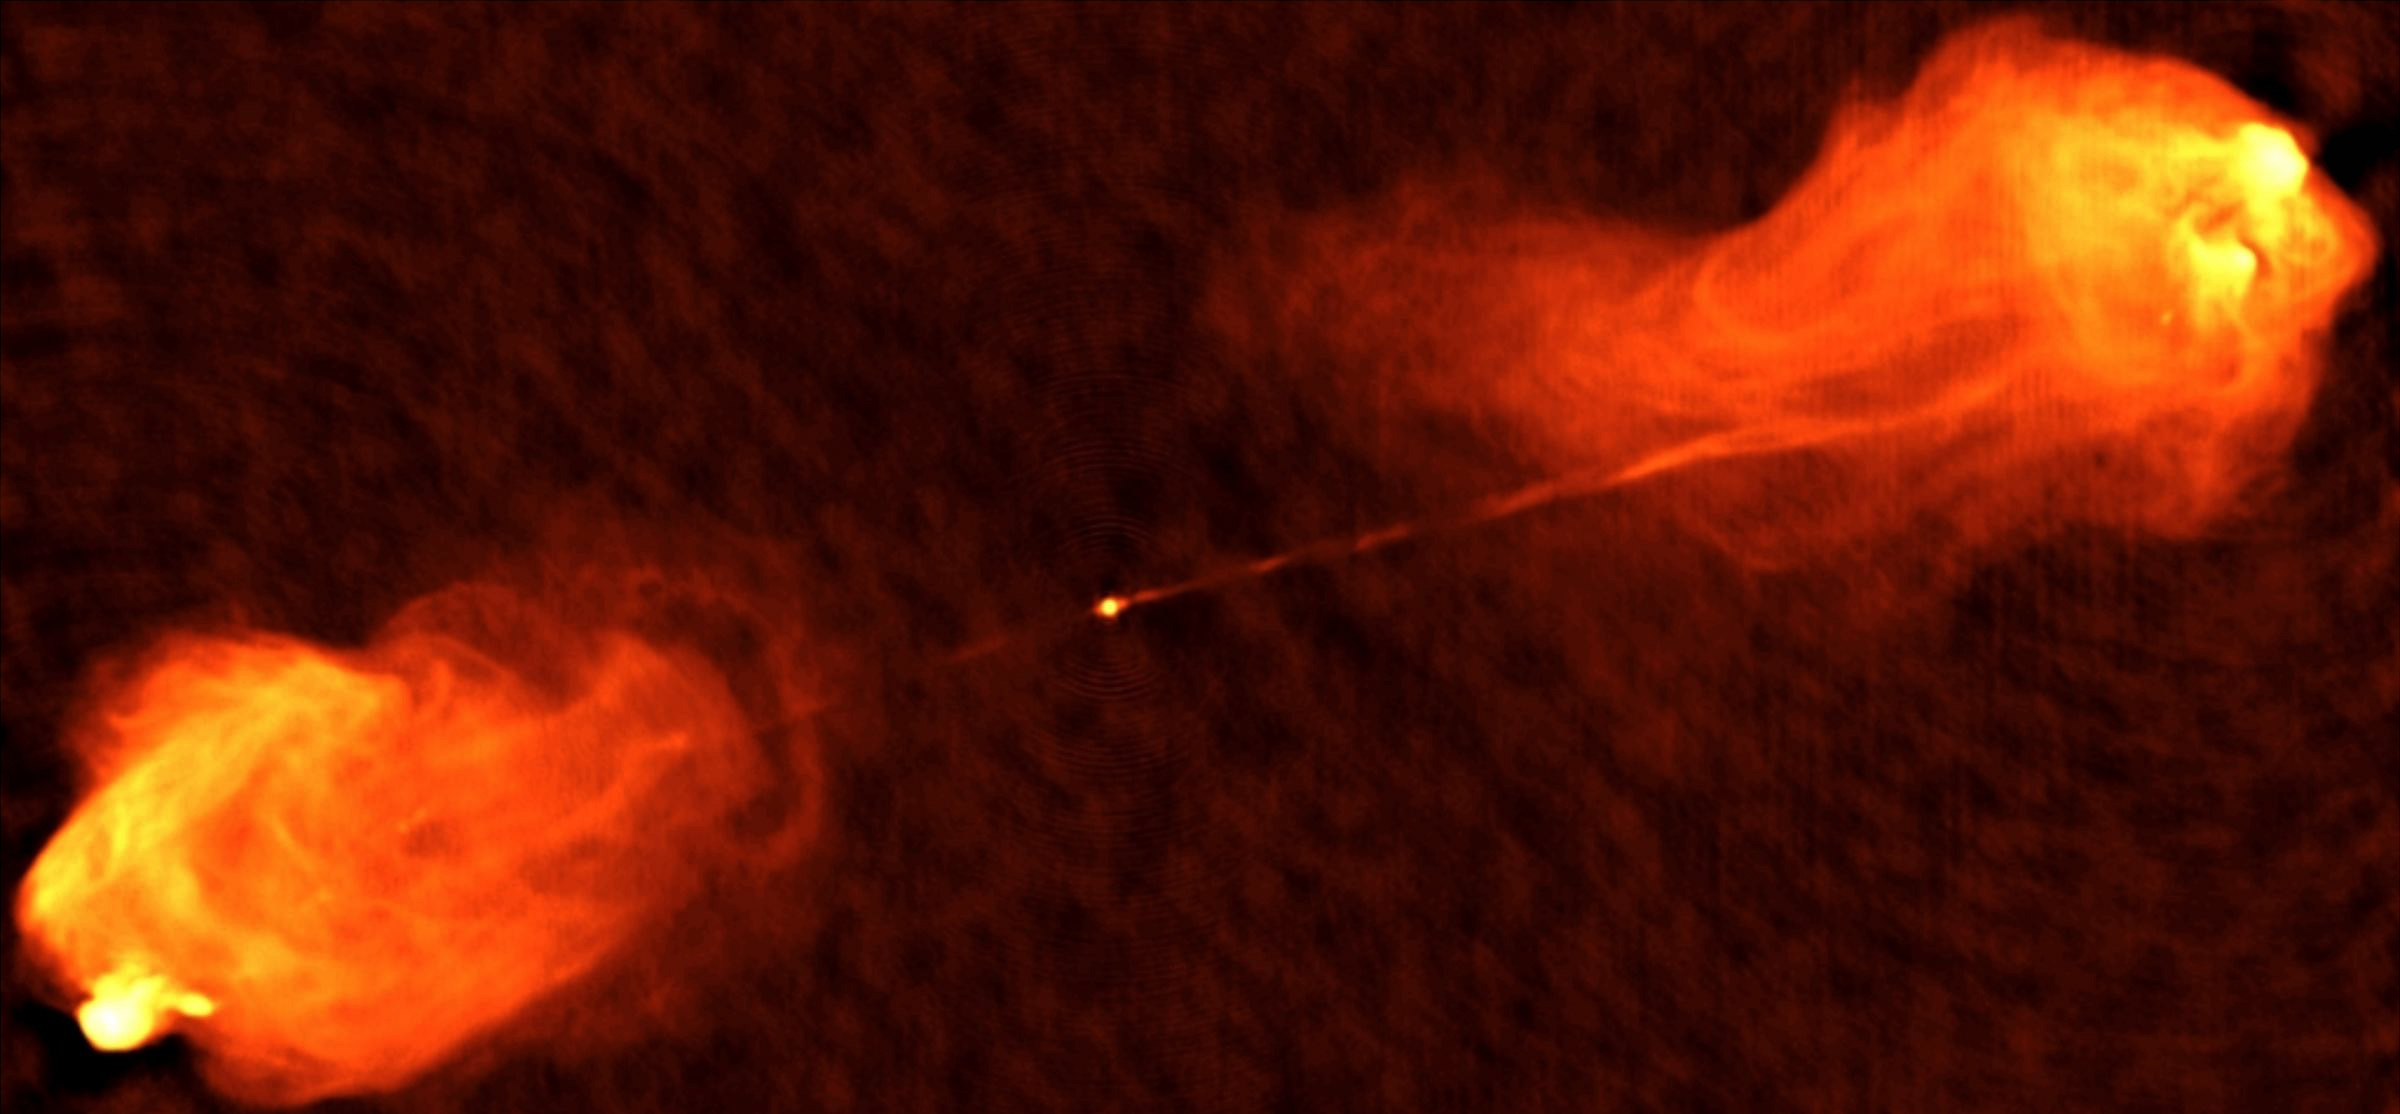 Radio data from the National Science Foundation's Very Large Array facility were used to create this image of Cygnus A, the brightest radio source in the sky found outside of our galaxy.